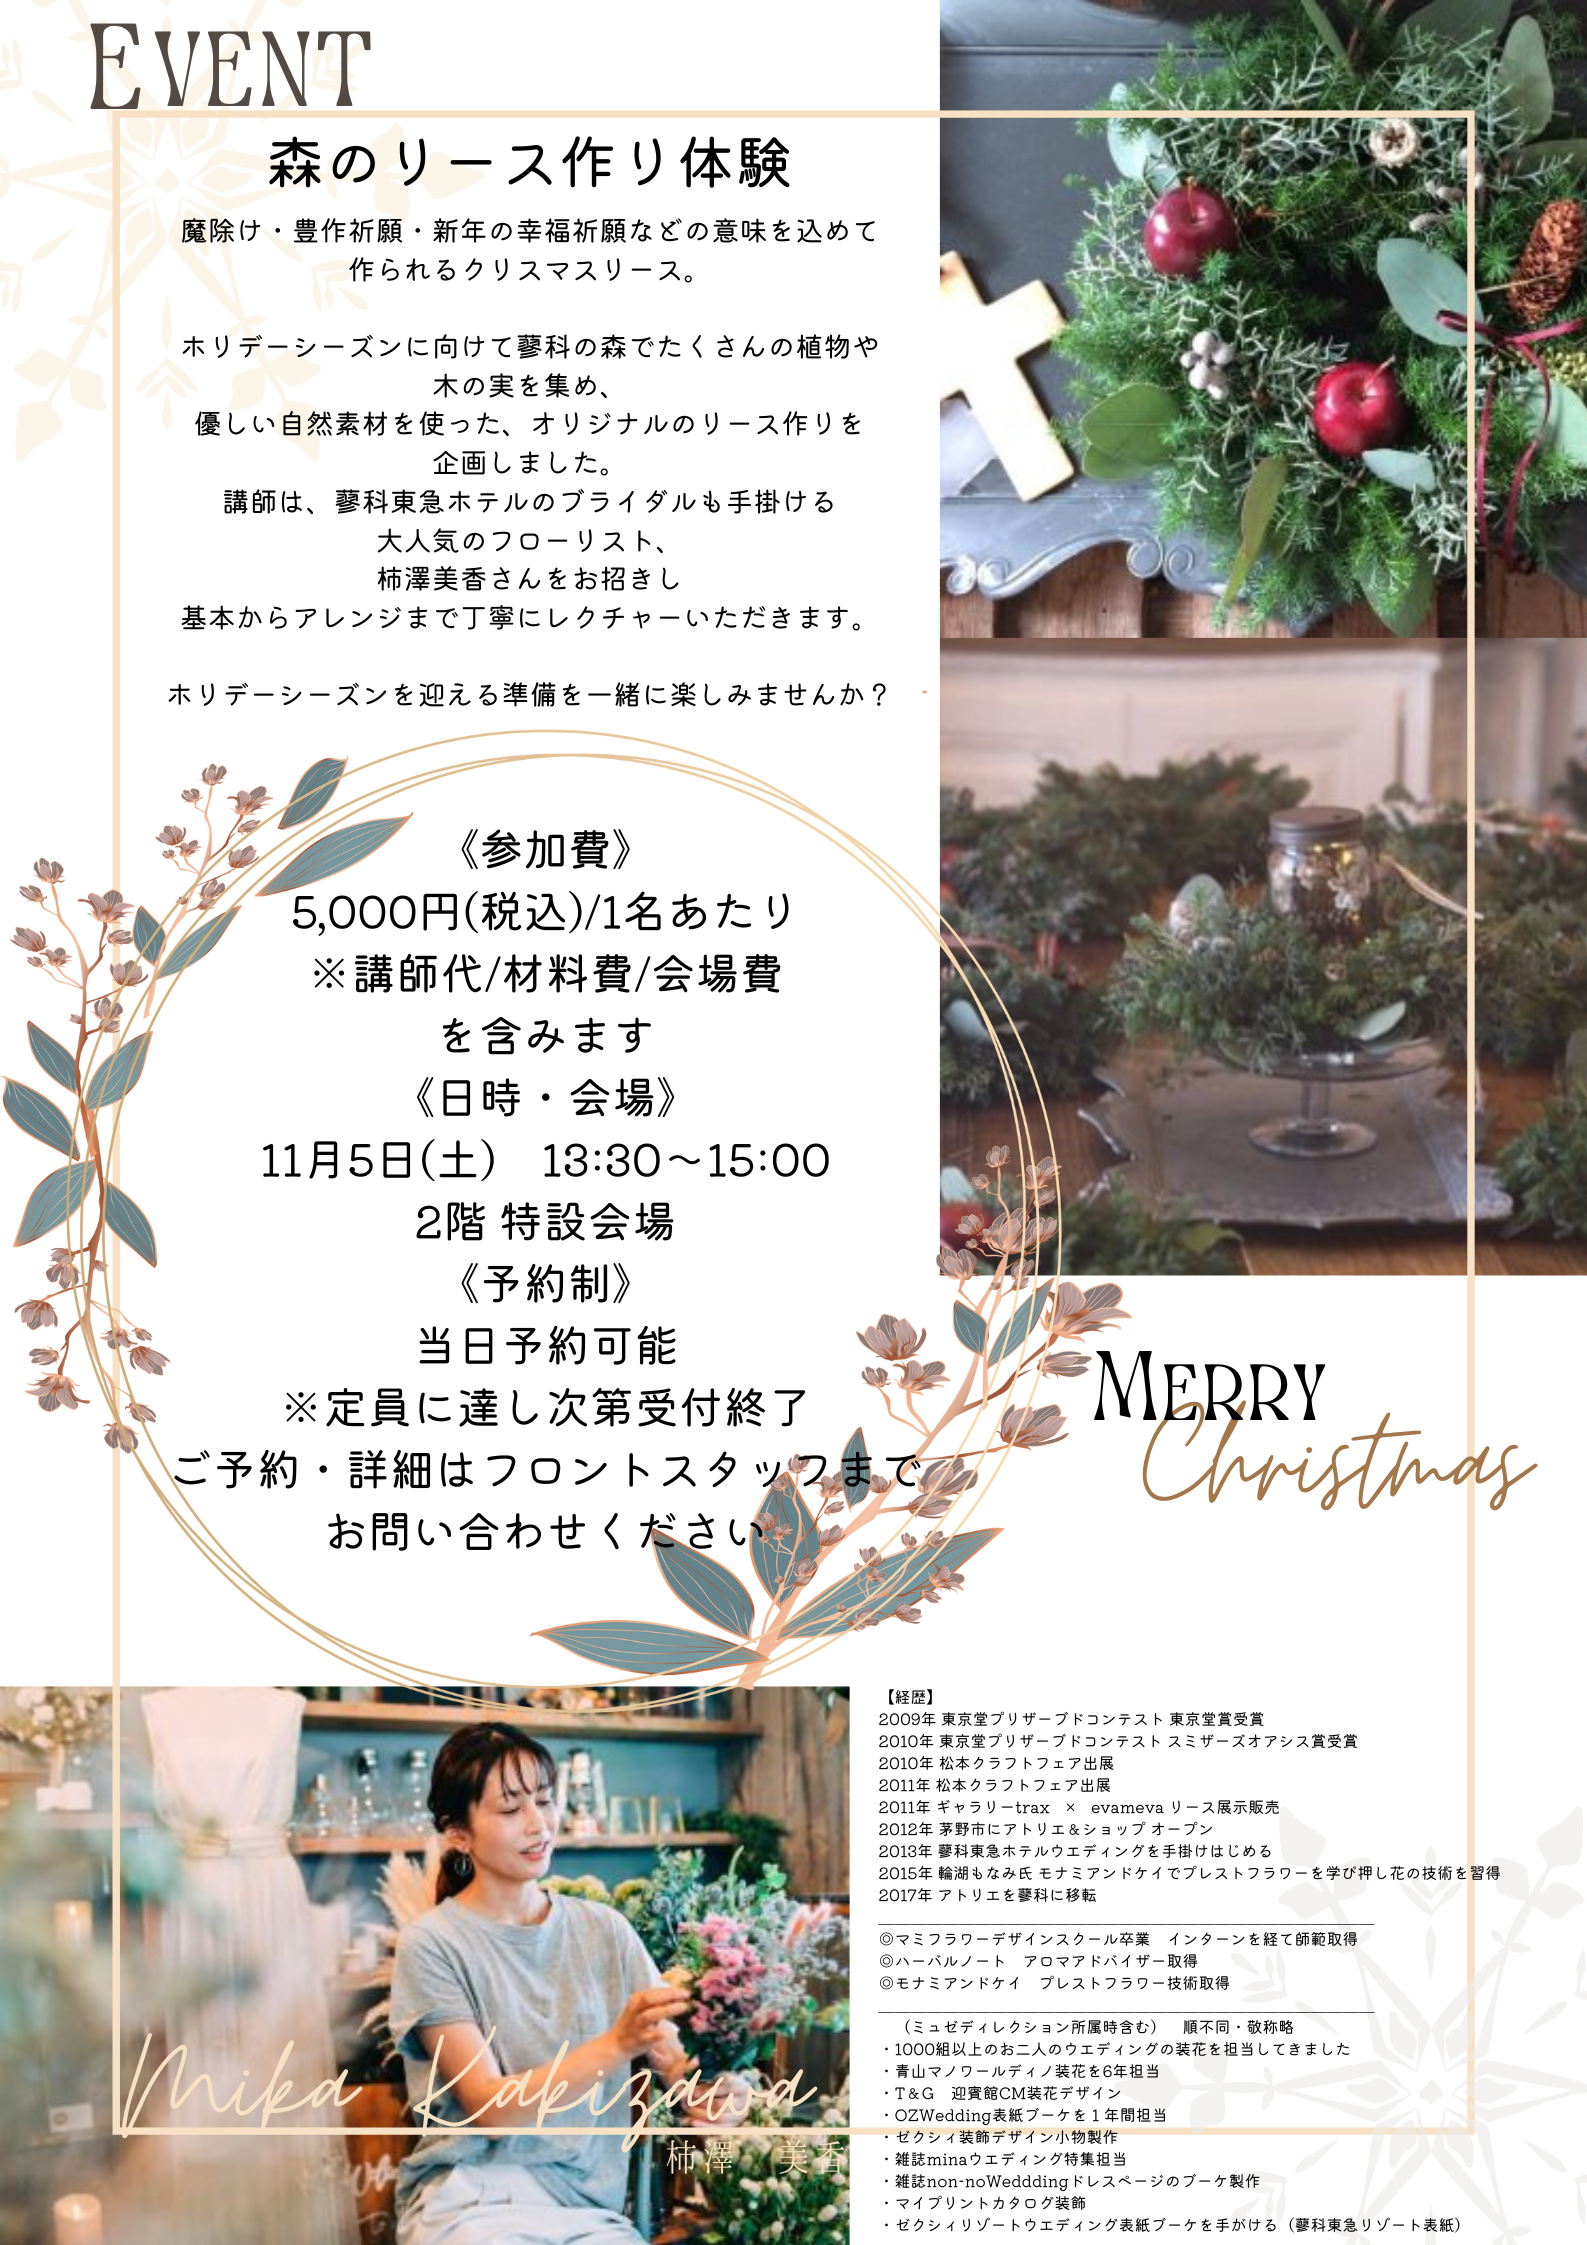 Merry Christmas Poster (2).png